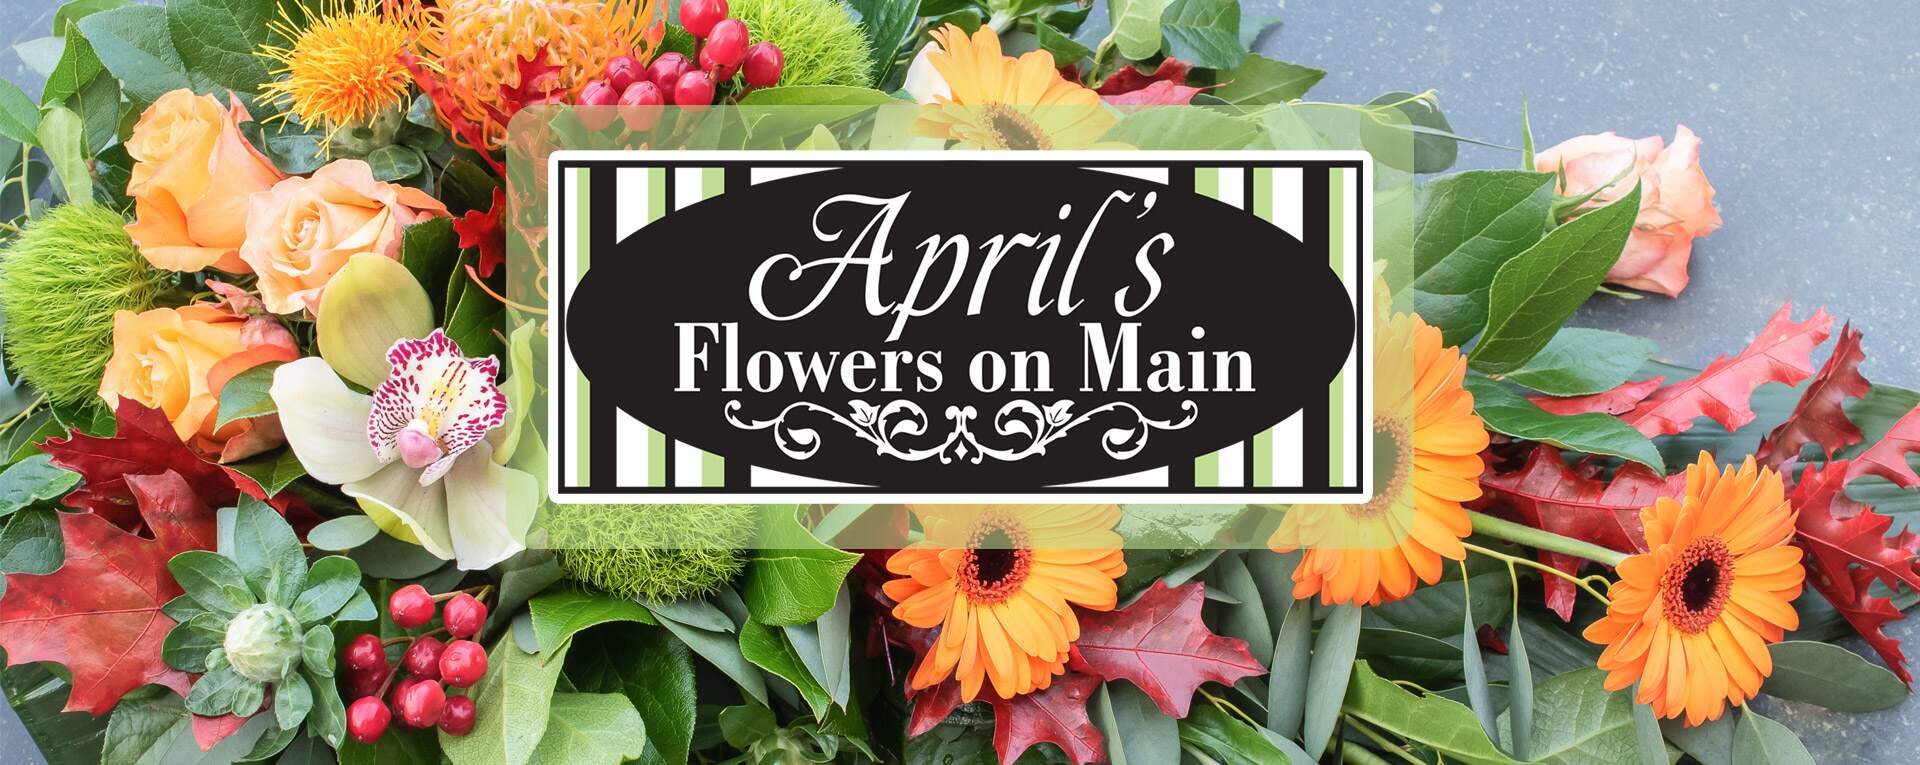 Sympathy and Funeral Arrangements April's Flowers on Main Franklin NC